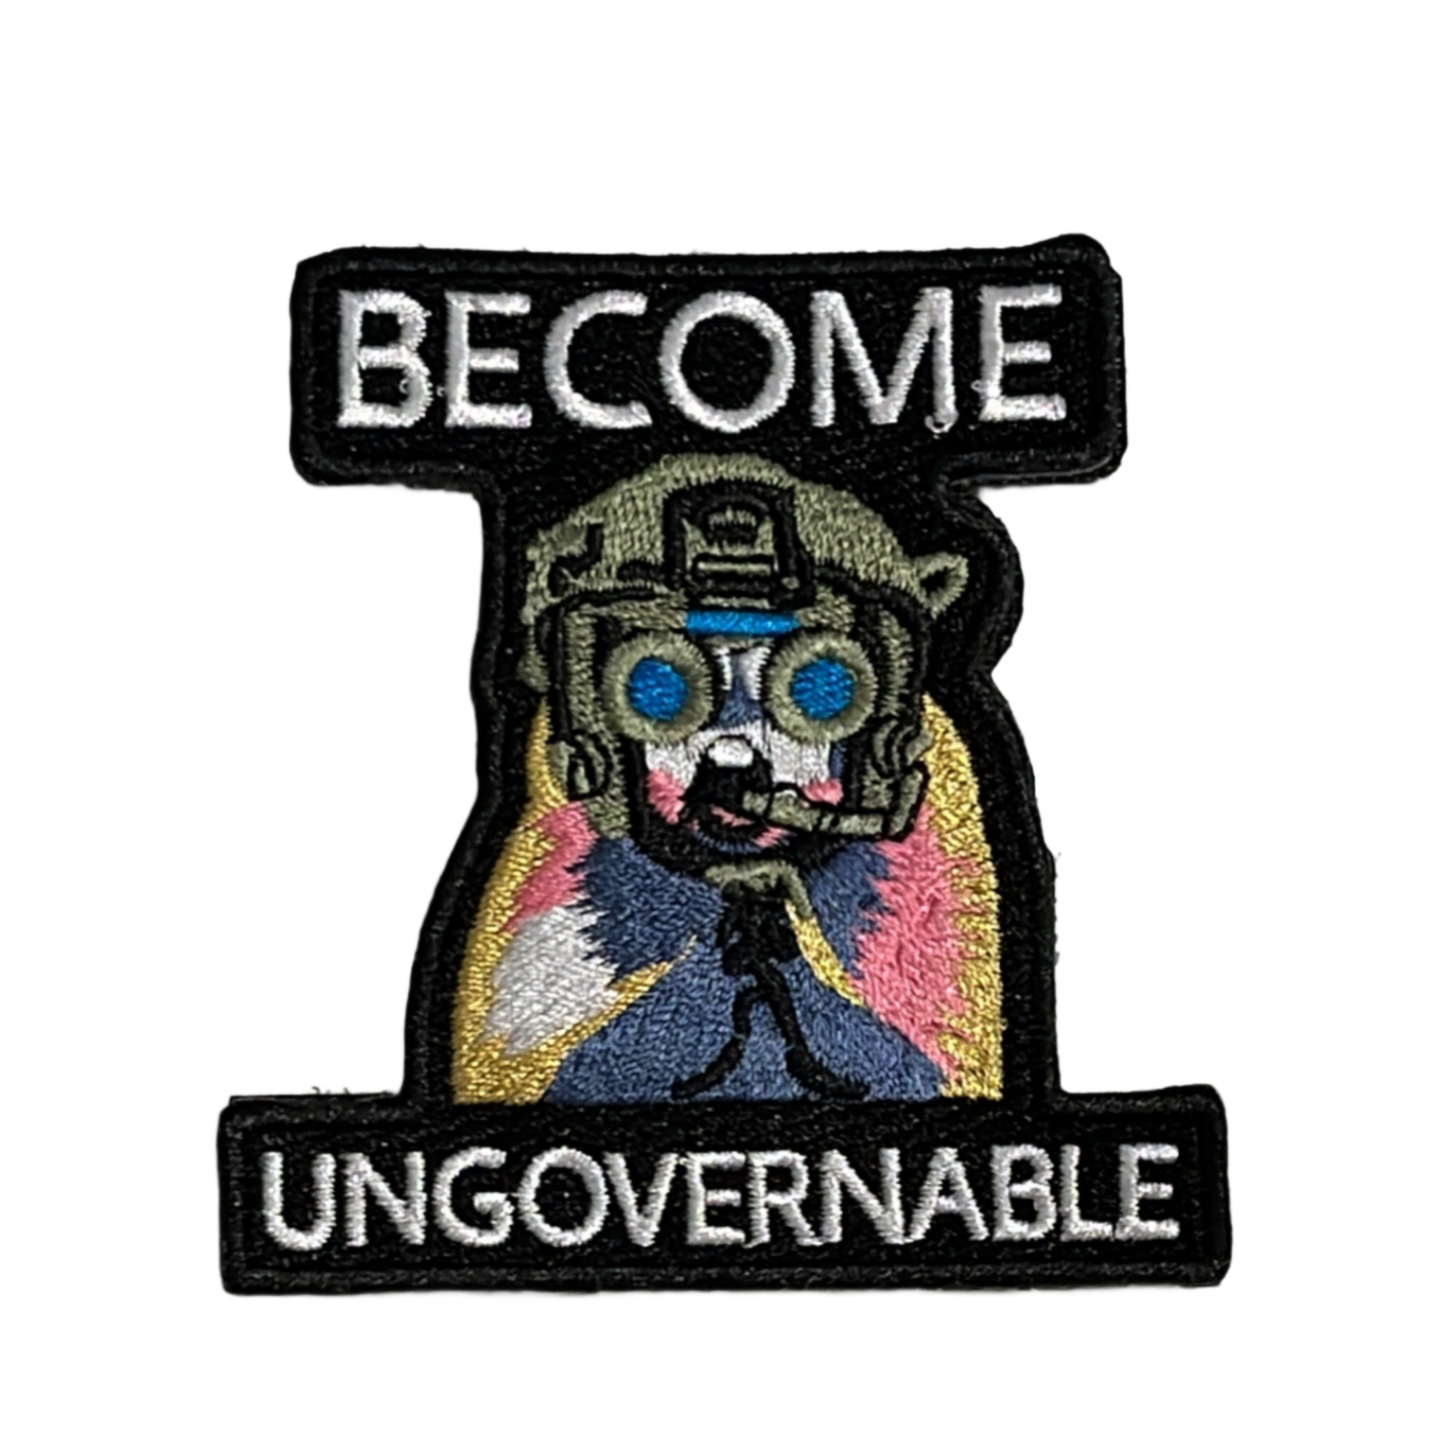 Become Ungovernable Trash Panda Raccoon Sewn Morale Patch